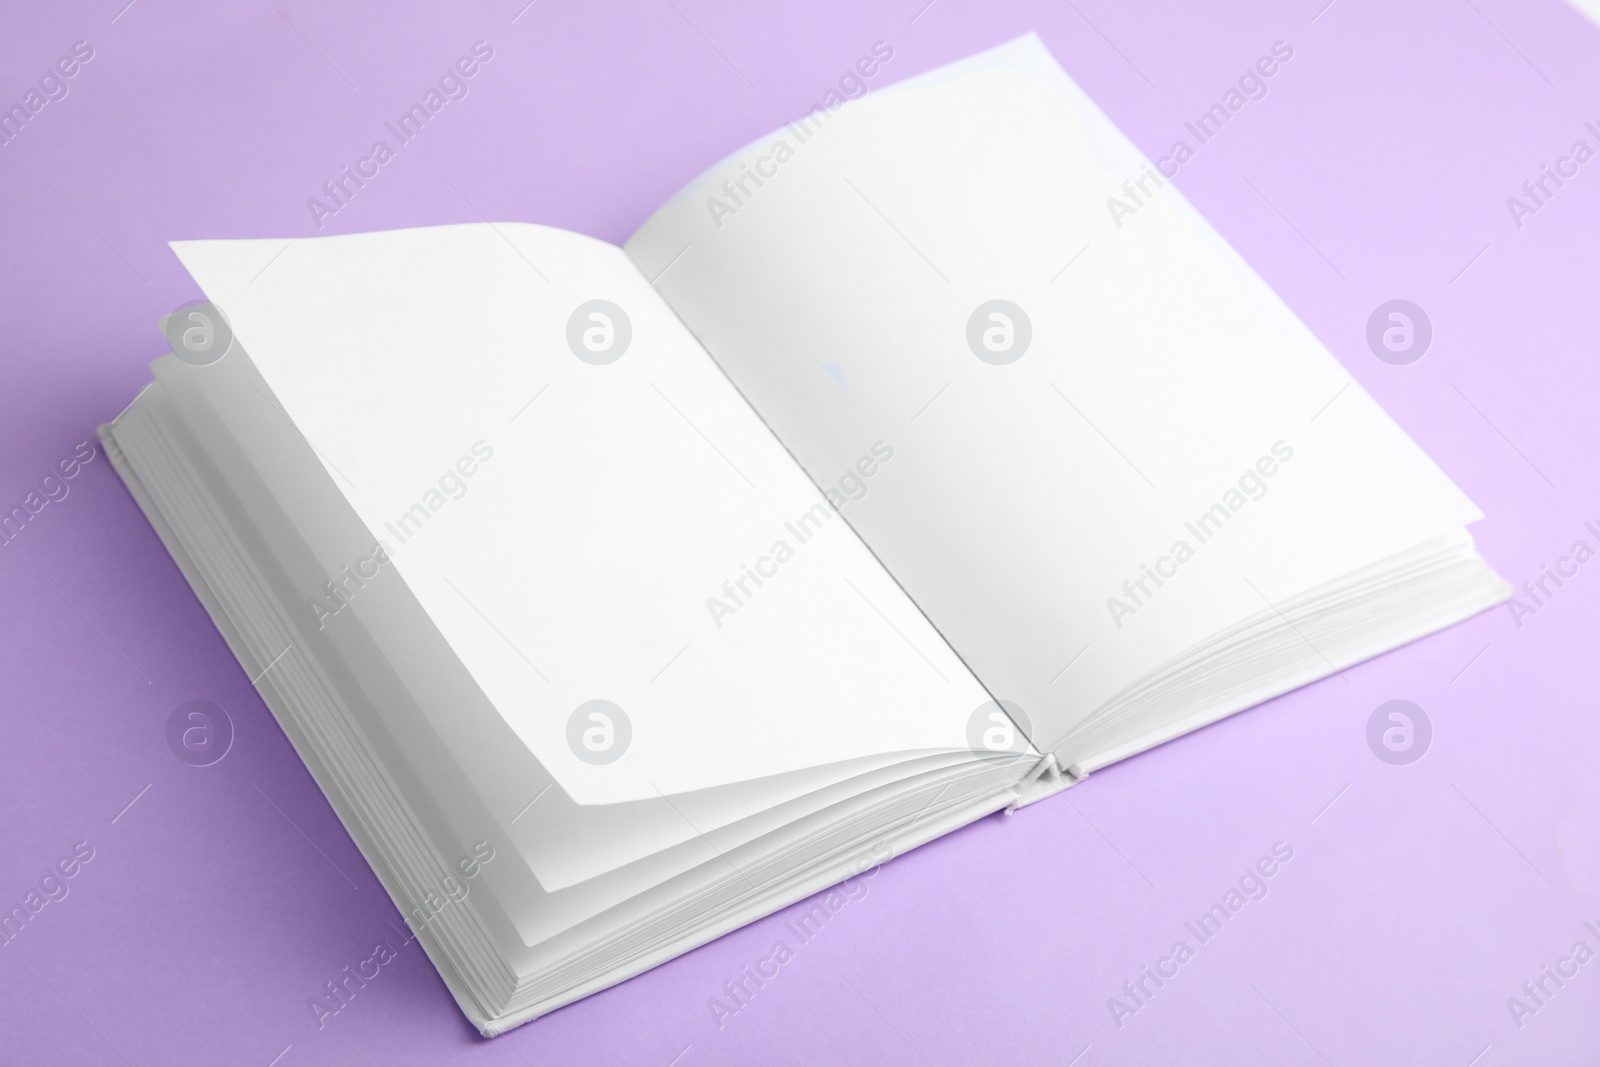 Photo of Open book with blank pages on violet background